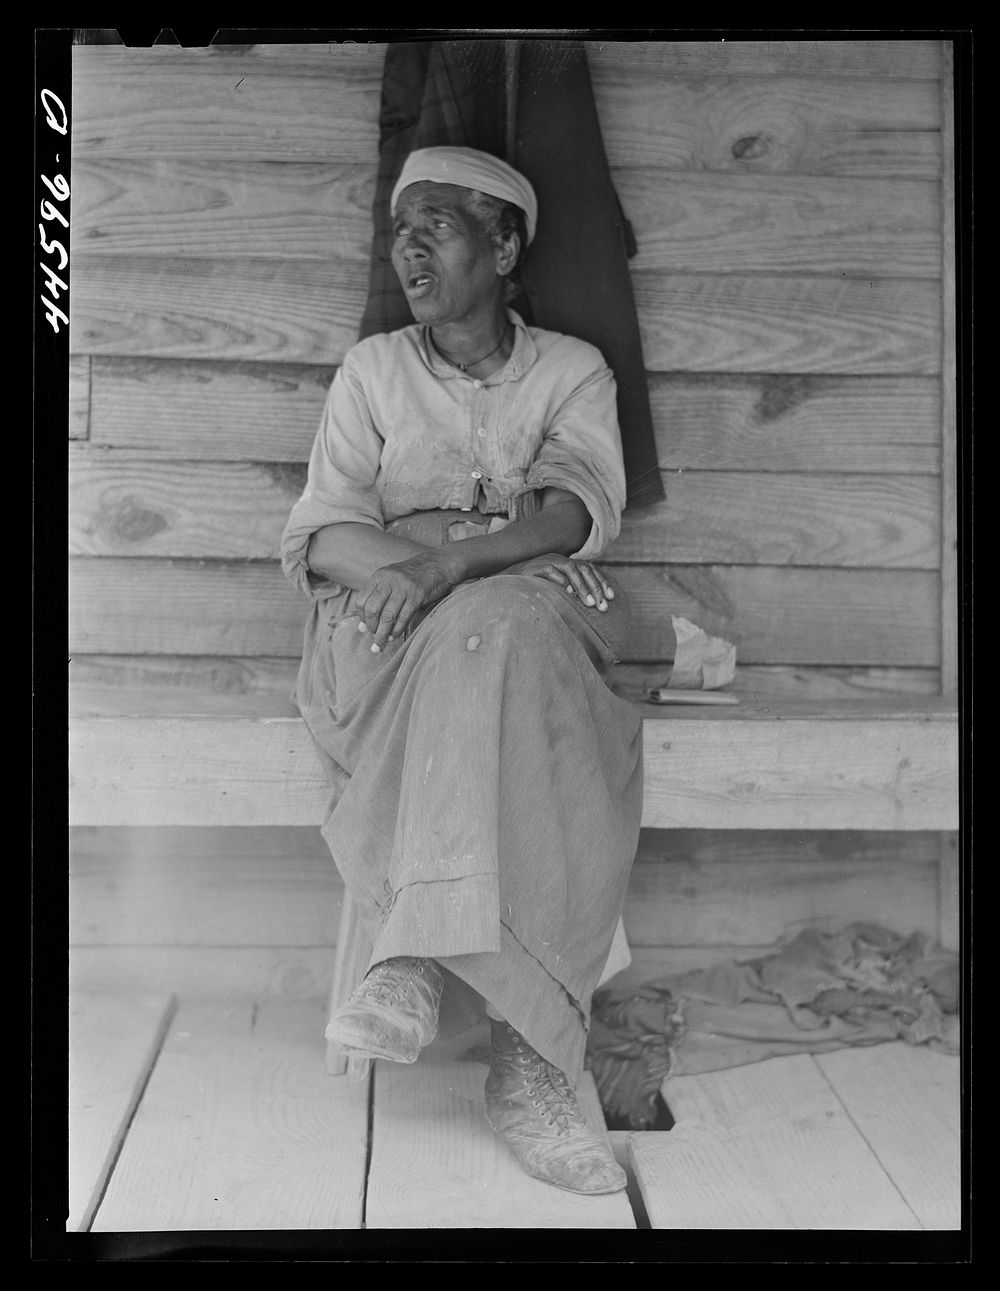 [Untitled photo, possibly related to: Mother of Mr. Allen Mathews, FSA (Farm Security Administration) borrower. Near…